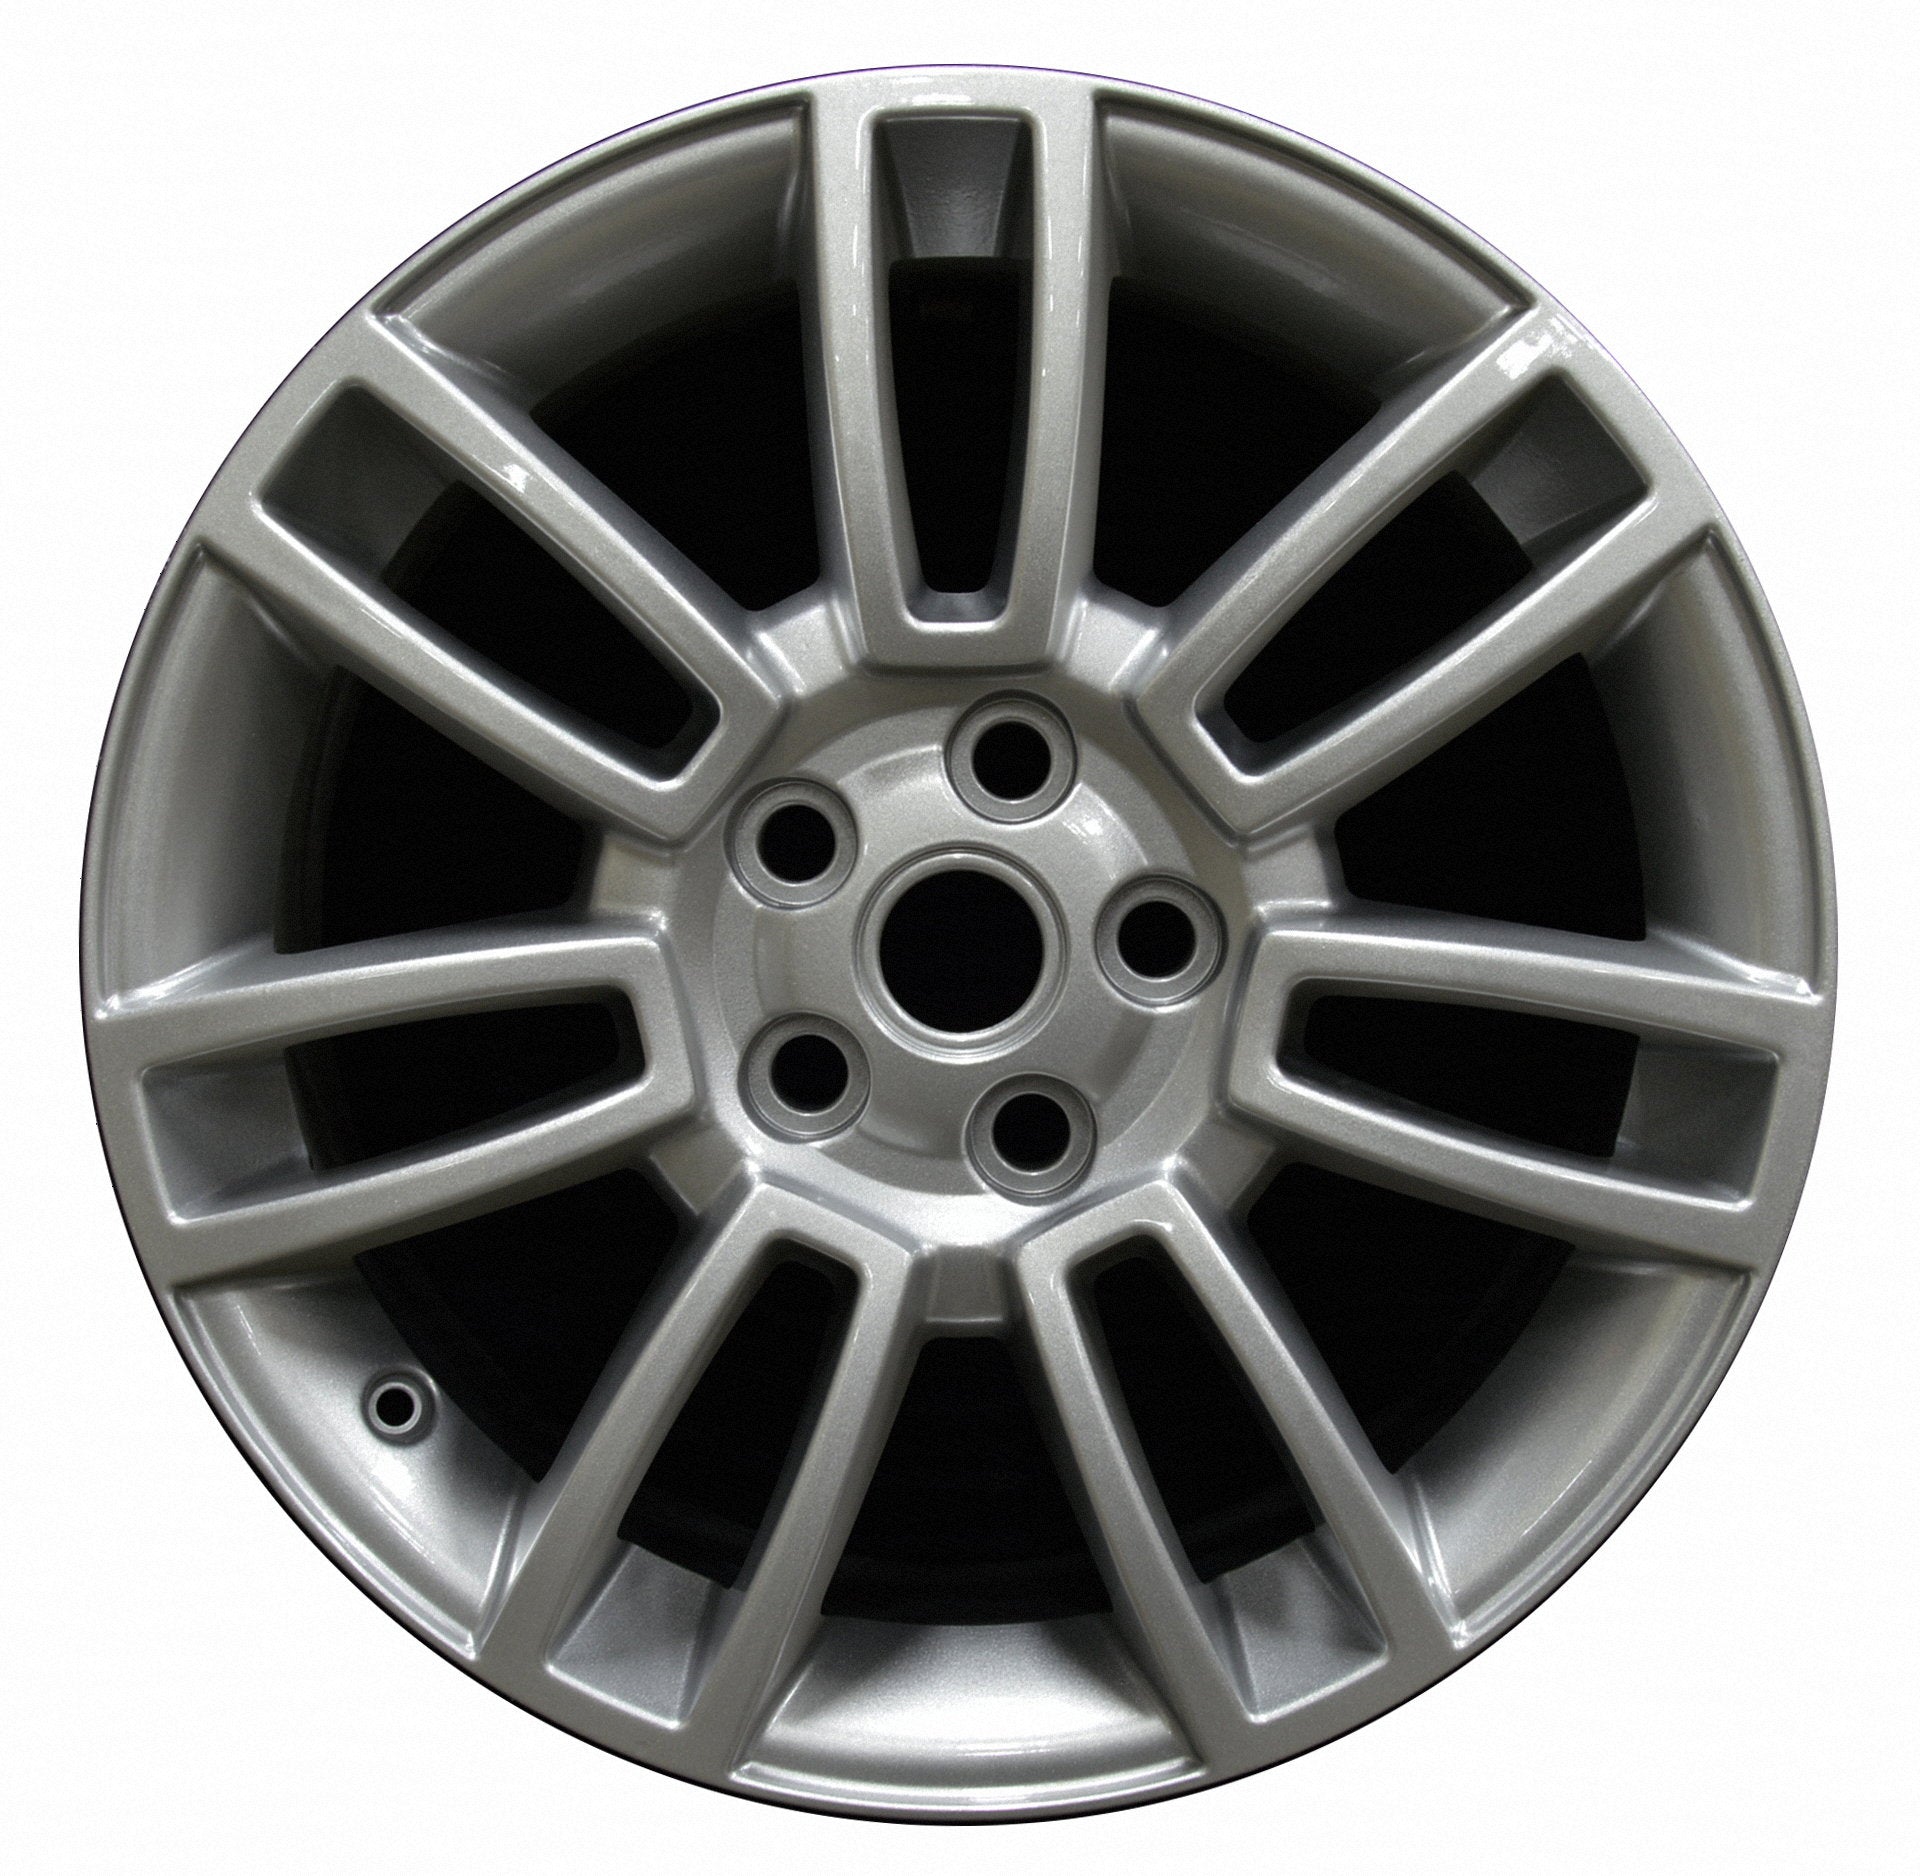 Land Rover Range Rover  2009, 2010, 2011, 2012 Factory OEM Car Wheel Size 19x8 Alloy WAO.72210.PS13.FF